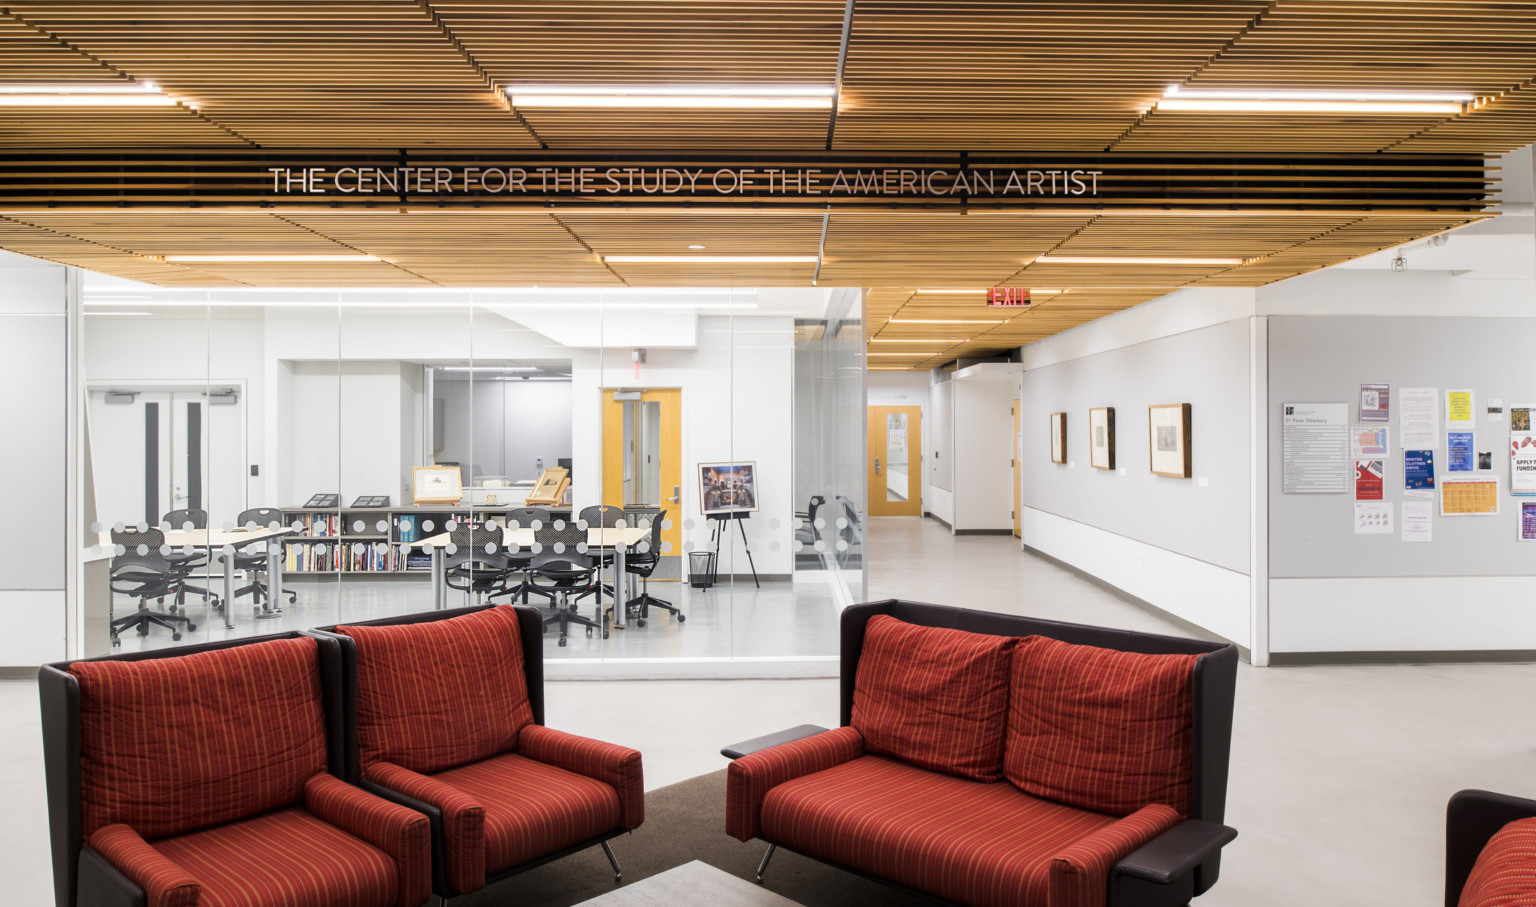 Red seats, wood slat ceiling, view of art storage via glass walls under The Center for the Study of the American Artist sign